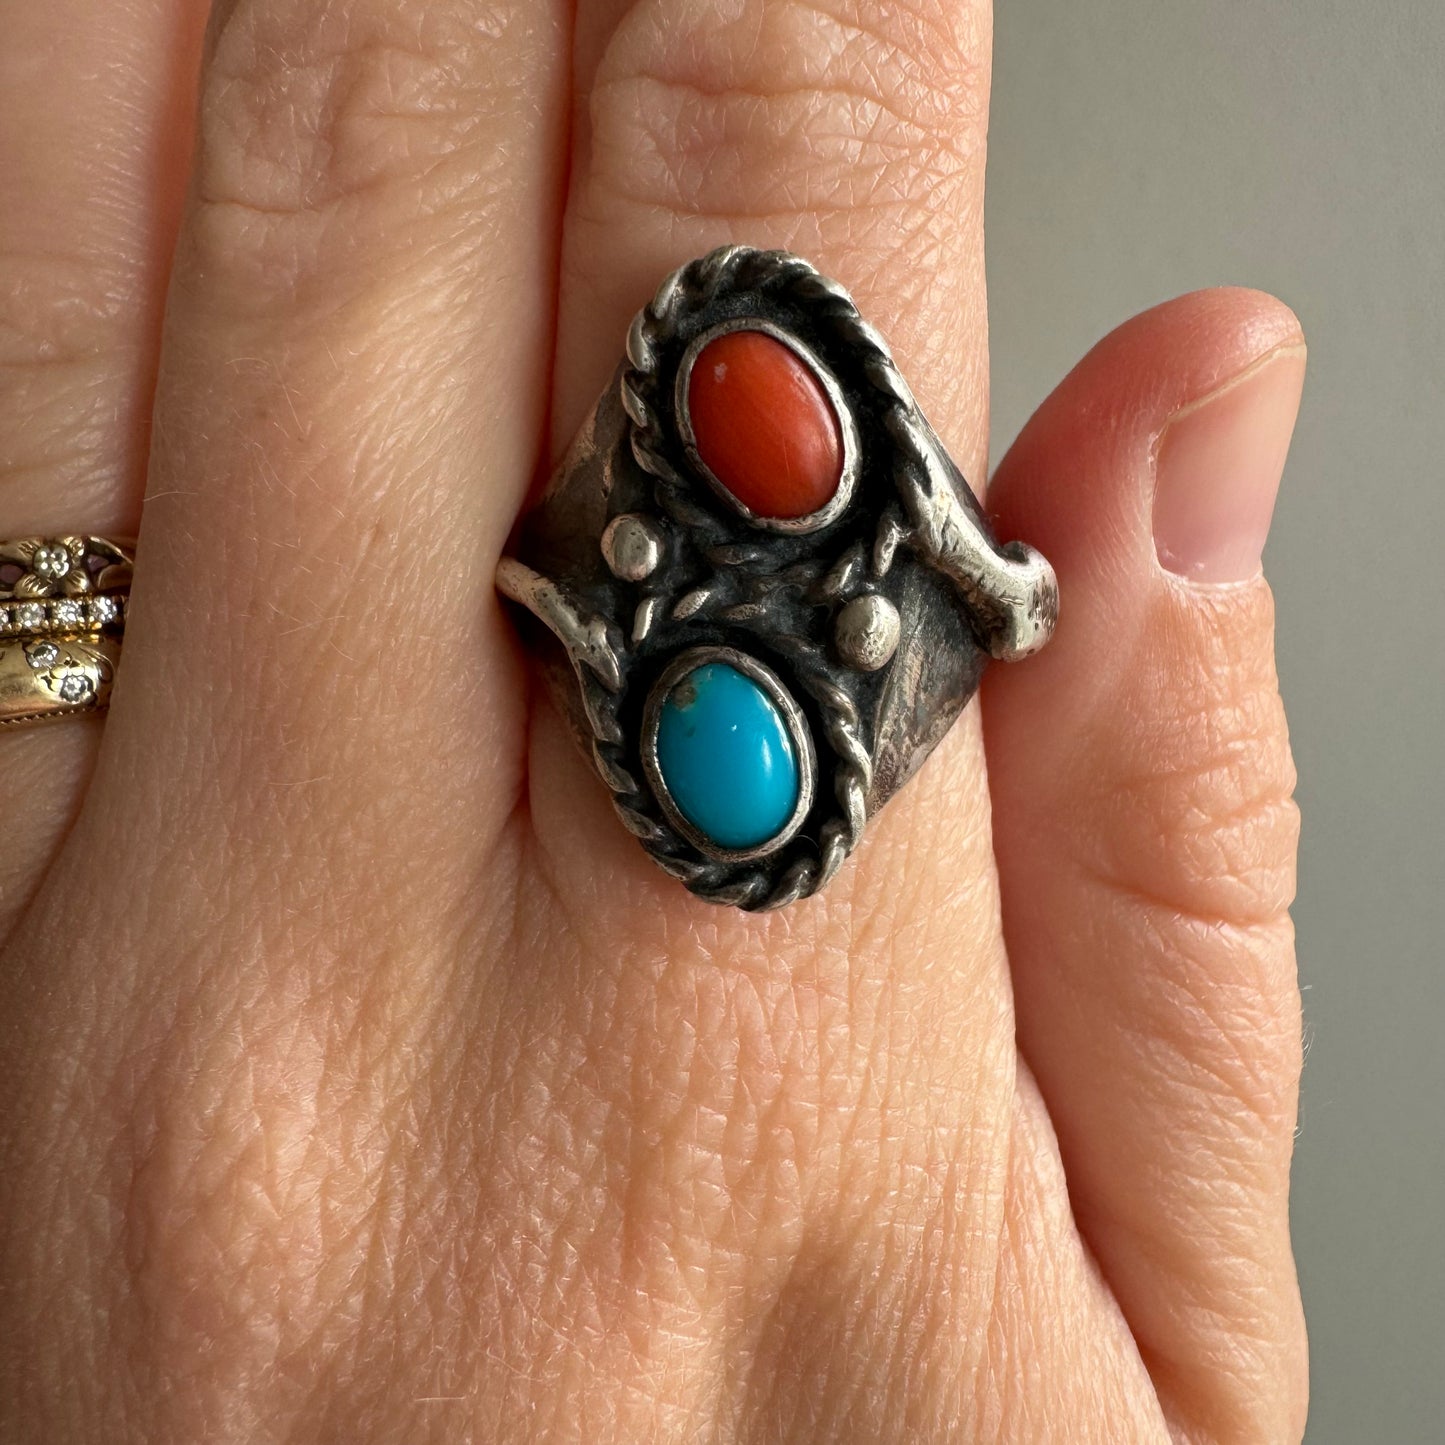 V I N T A G E // secret snake / sterling silver turquoise and coral ring with a sneaky snake / size 9.75